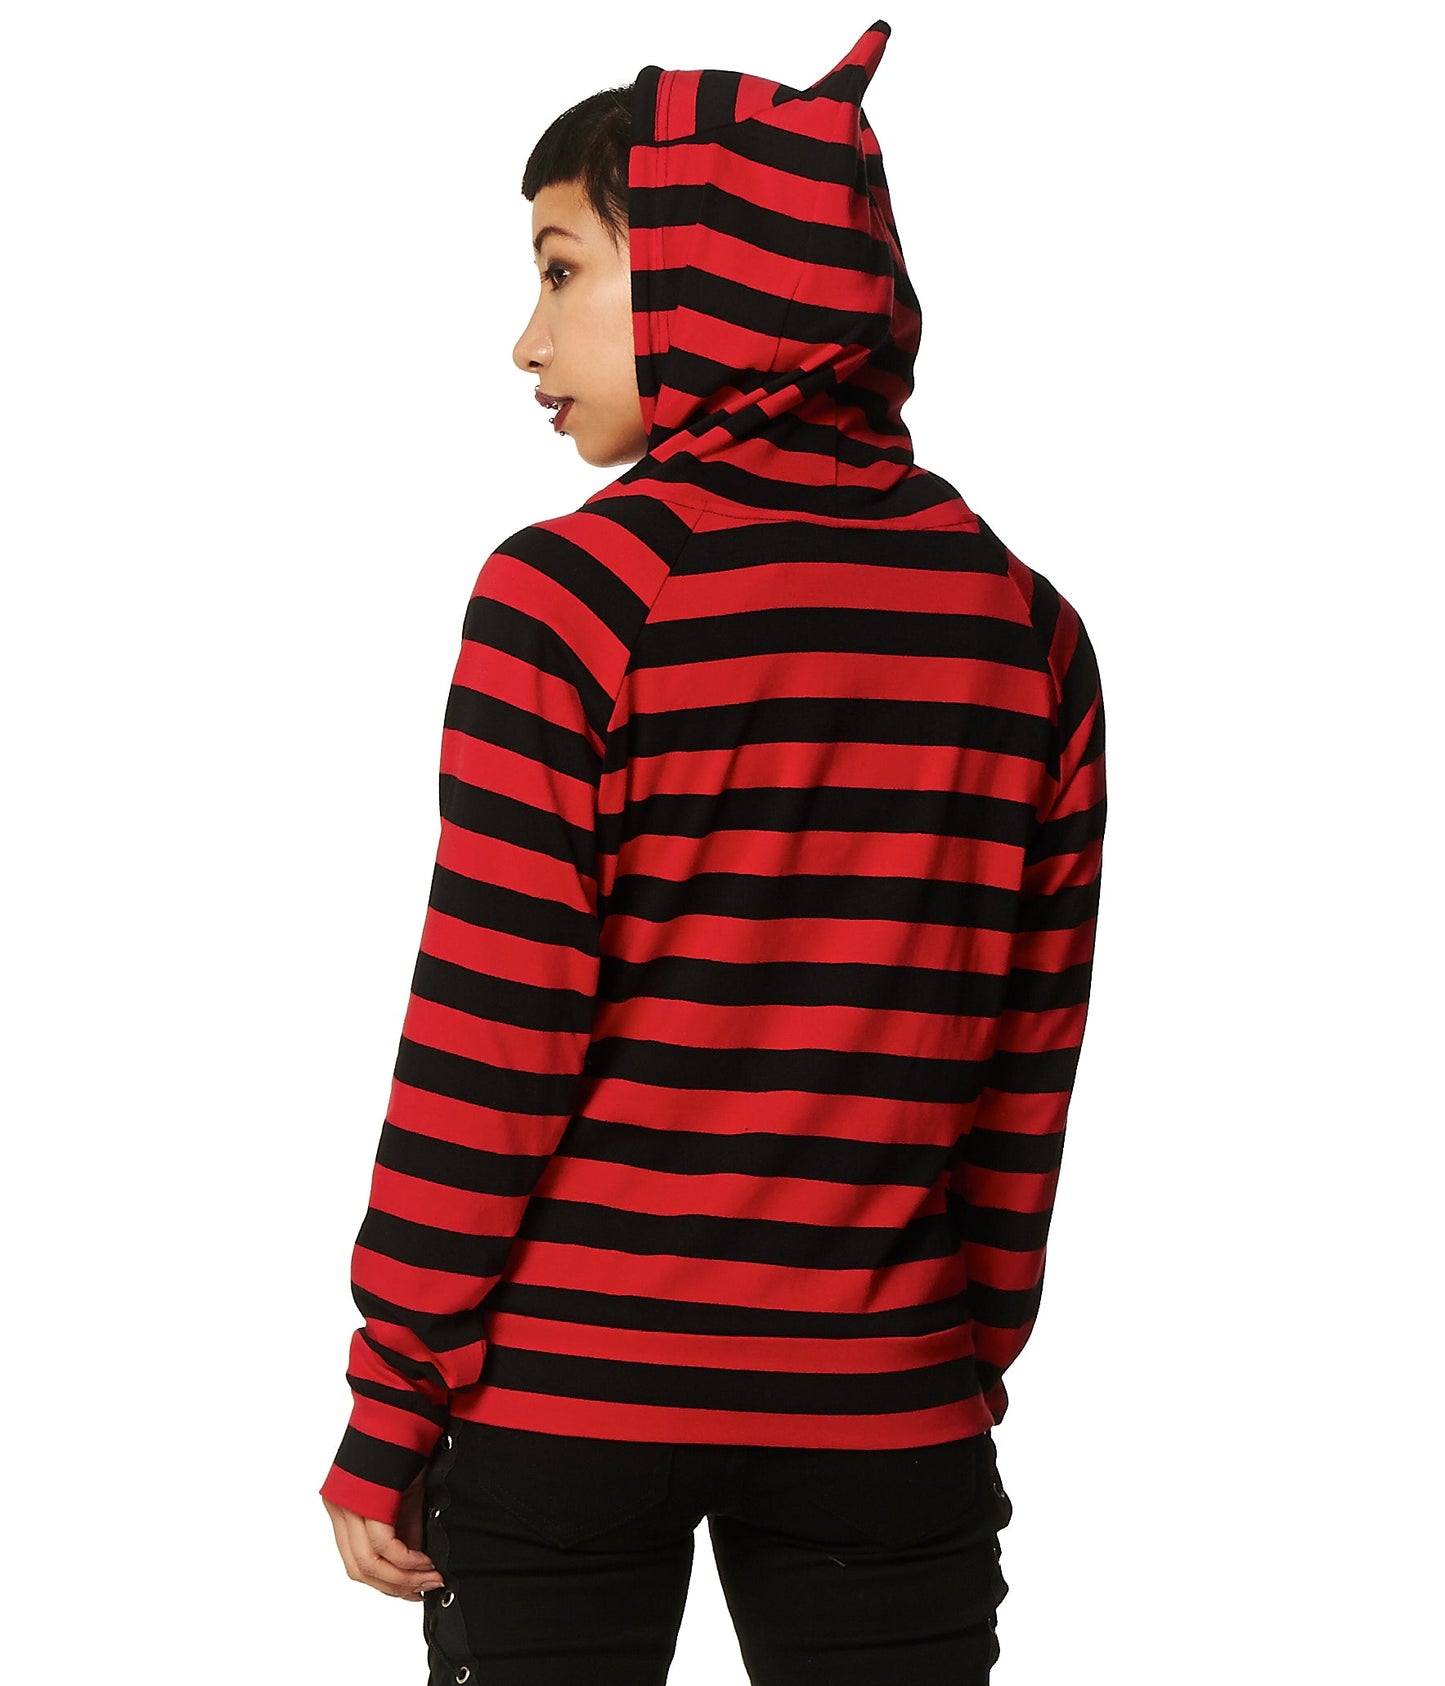 Alternative model in striped black and red hoodie with cat ear hood.